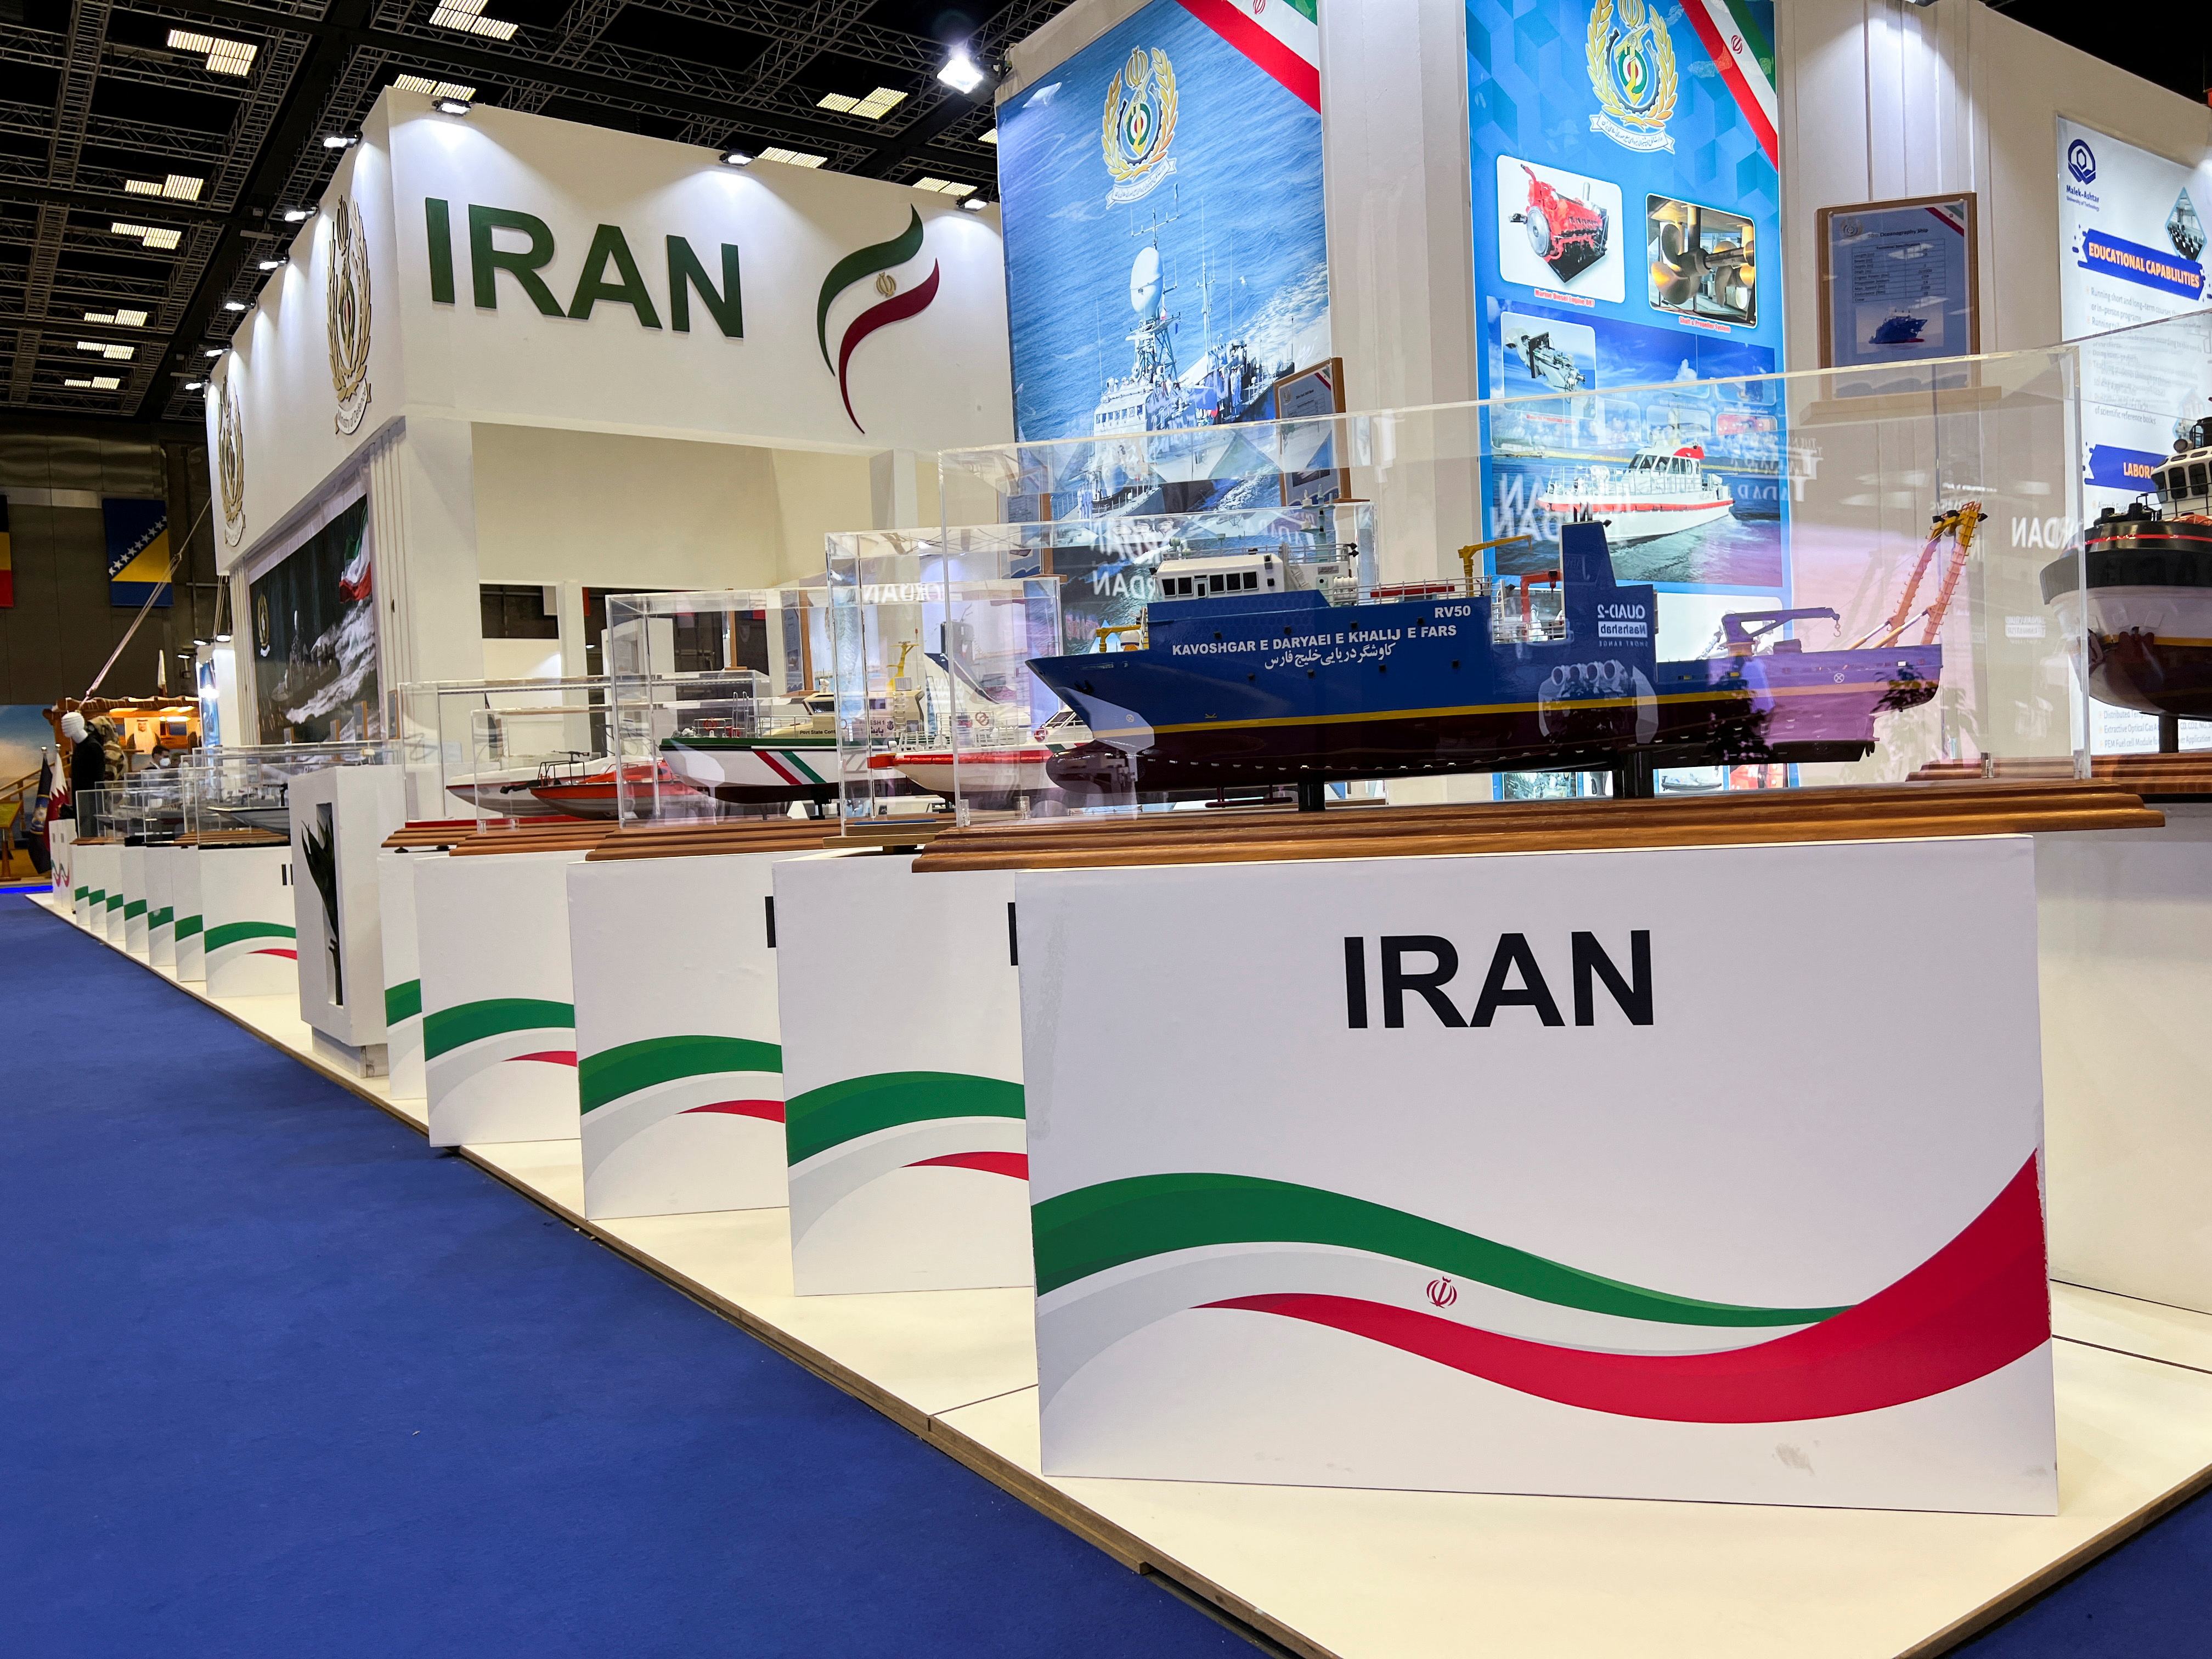 Military boat models are displayed at the IRGC booth at the Doha International Maritime Defense Exhibition and Conference (DIMDEX) in Doha